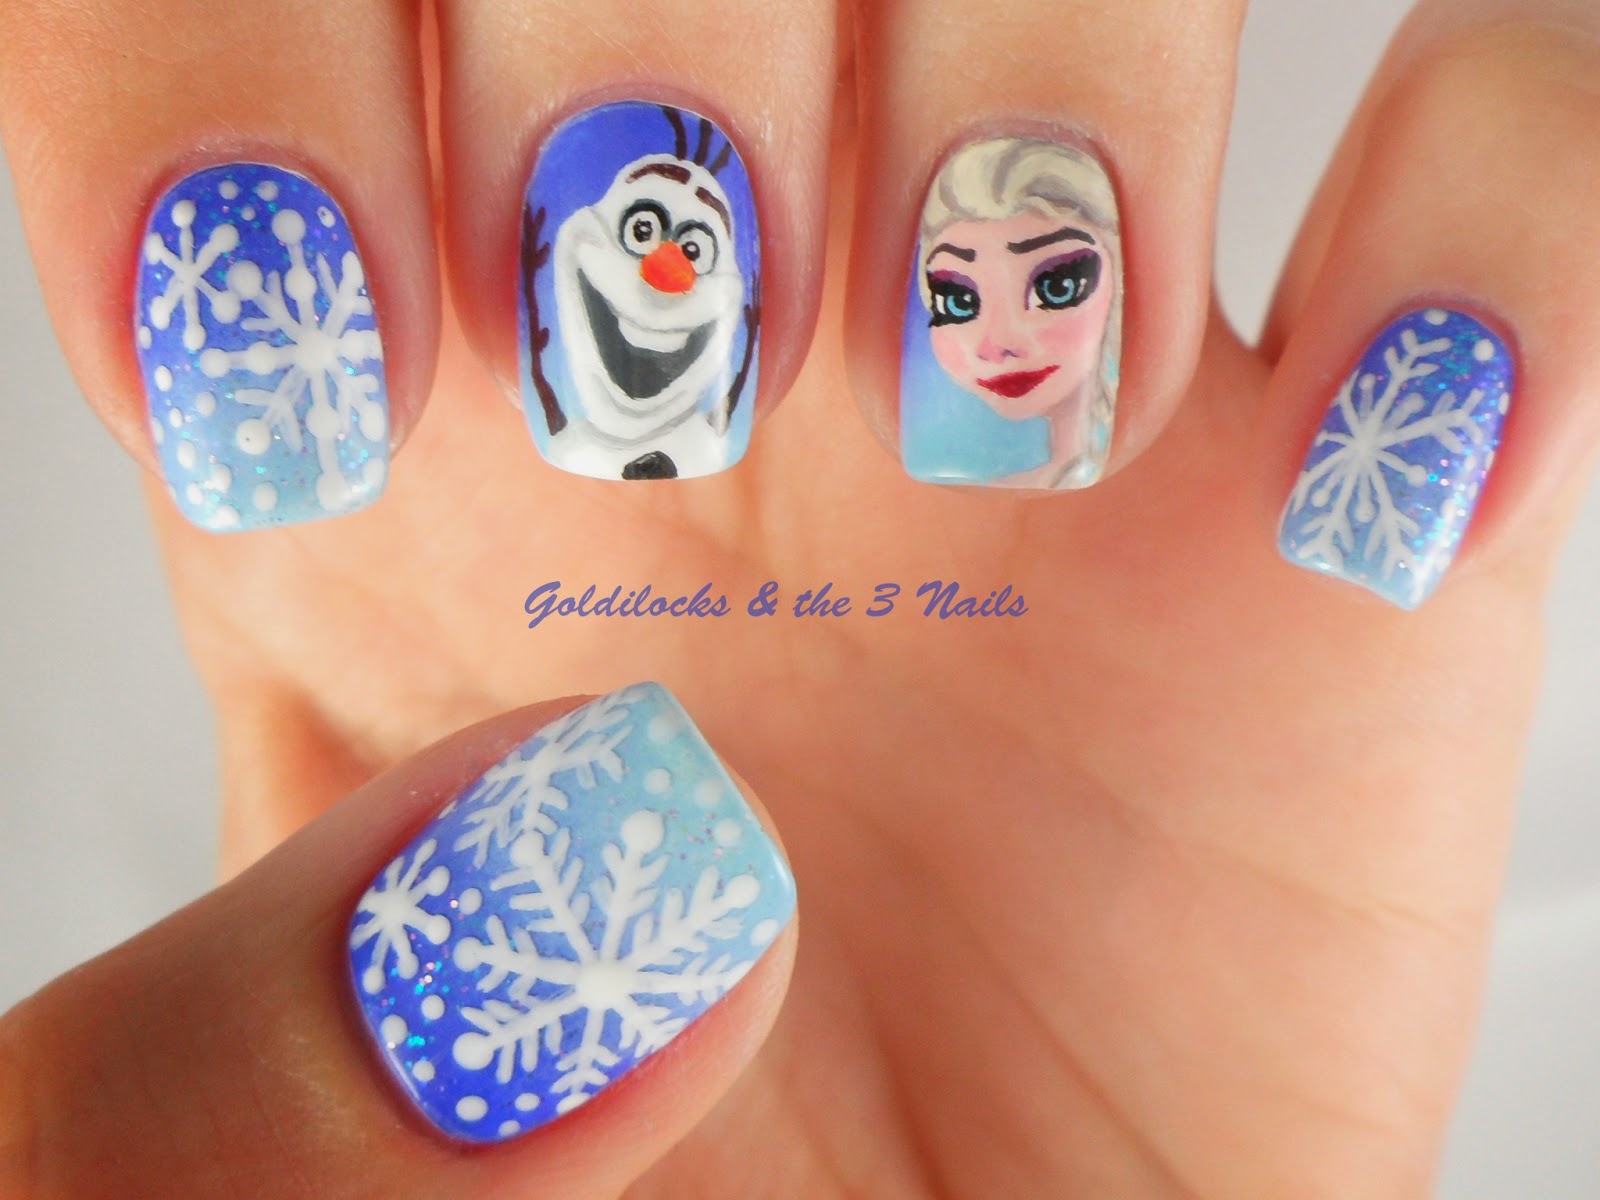 Goldilocks & the Three Nails: Do you want to build a snowman?